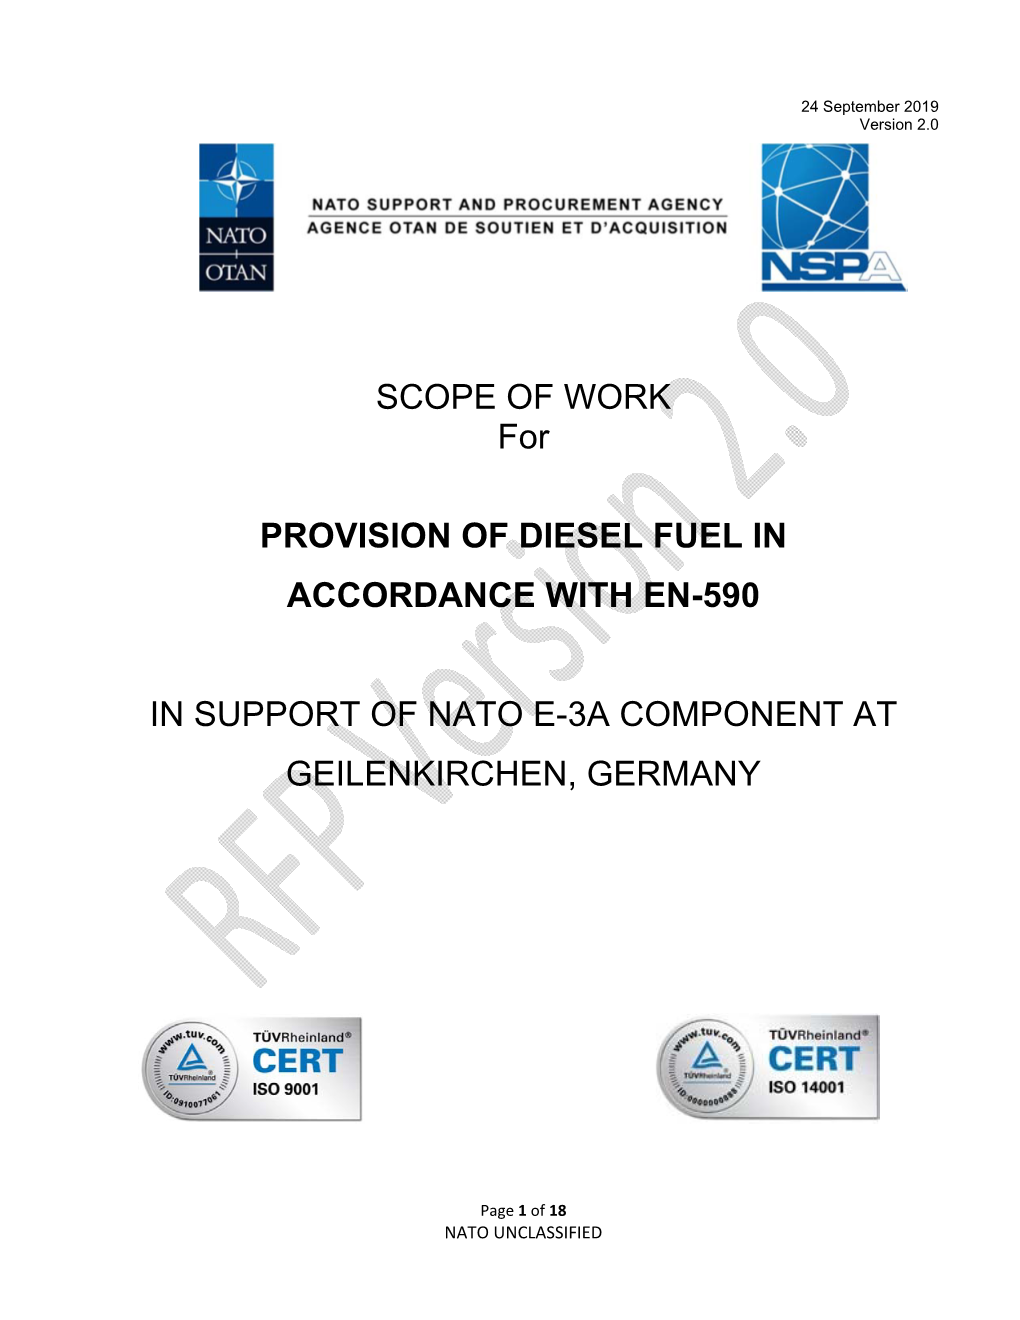 SCOPE of WORK for PROVISION of DIESEL FUEL in ACCORDANCE with EN-590 in SUPPORT of NATO E-3A COMPONENT at GEILENKIRCHEN, GERMANY